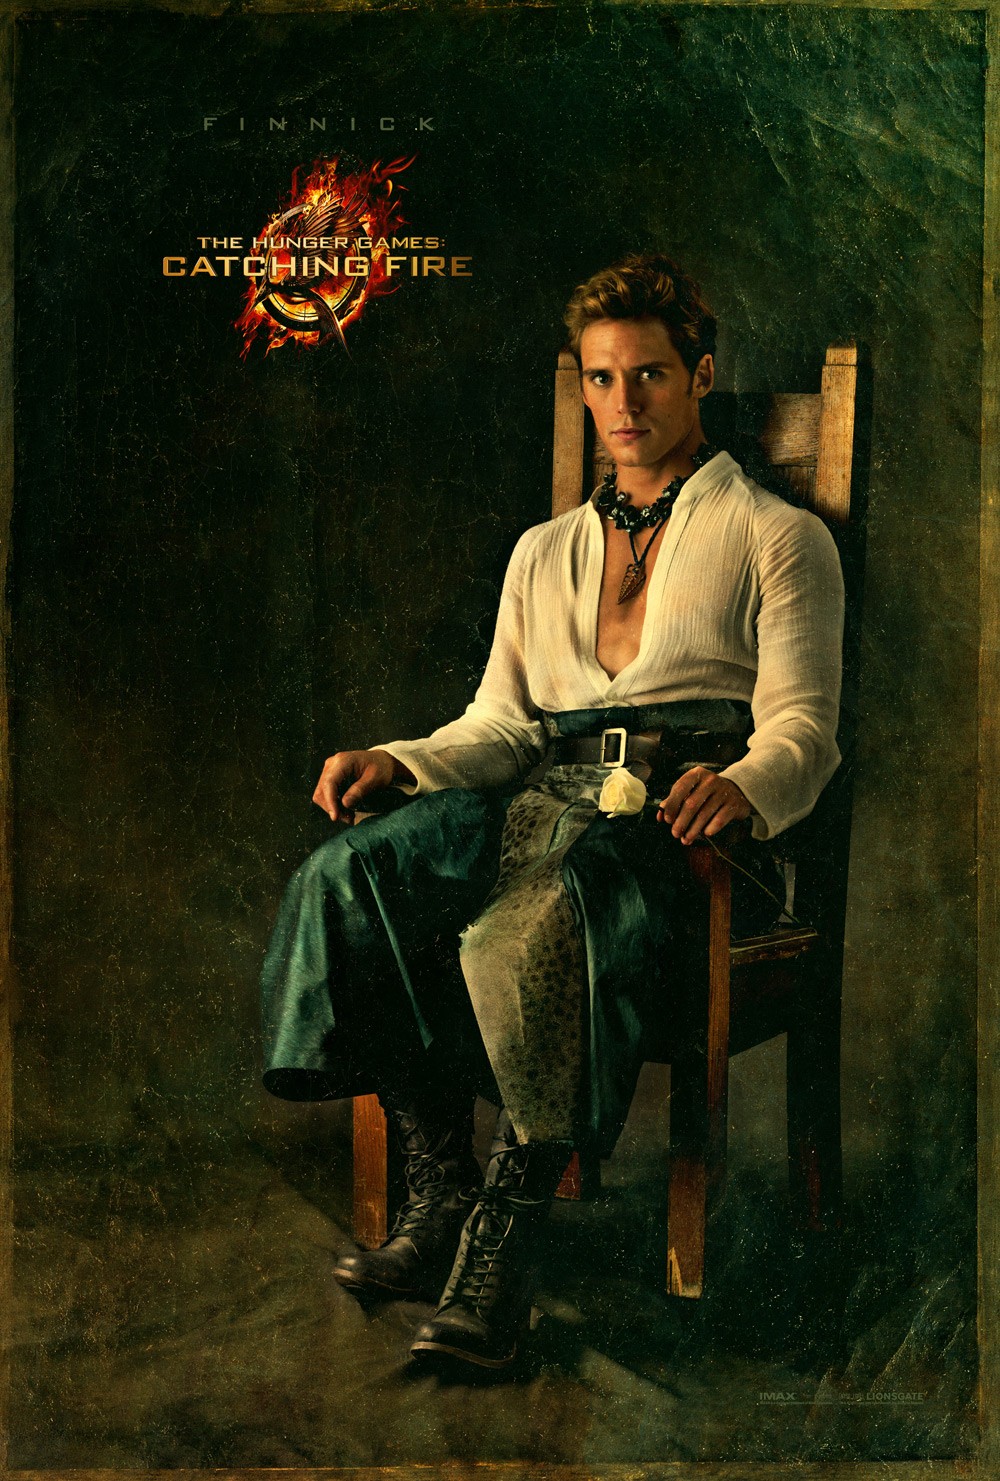 Catching-Fire-Finnick-Character-Poster